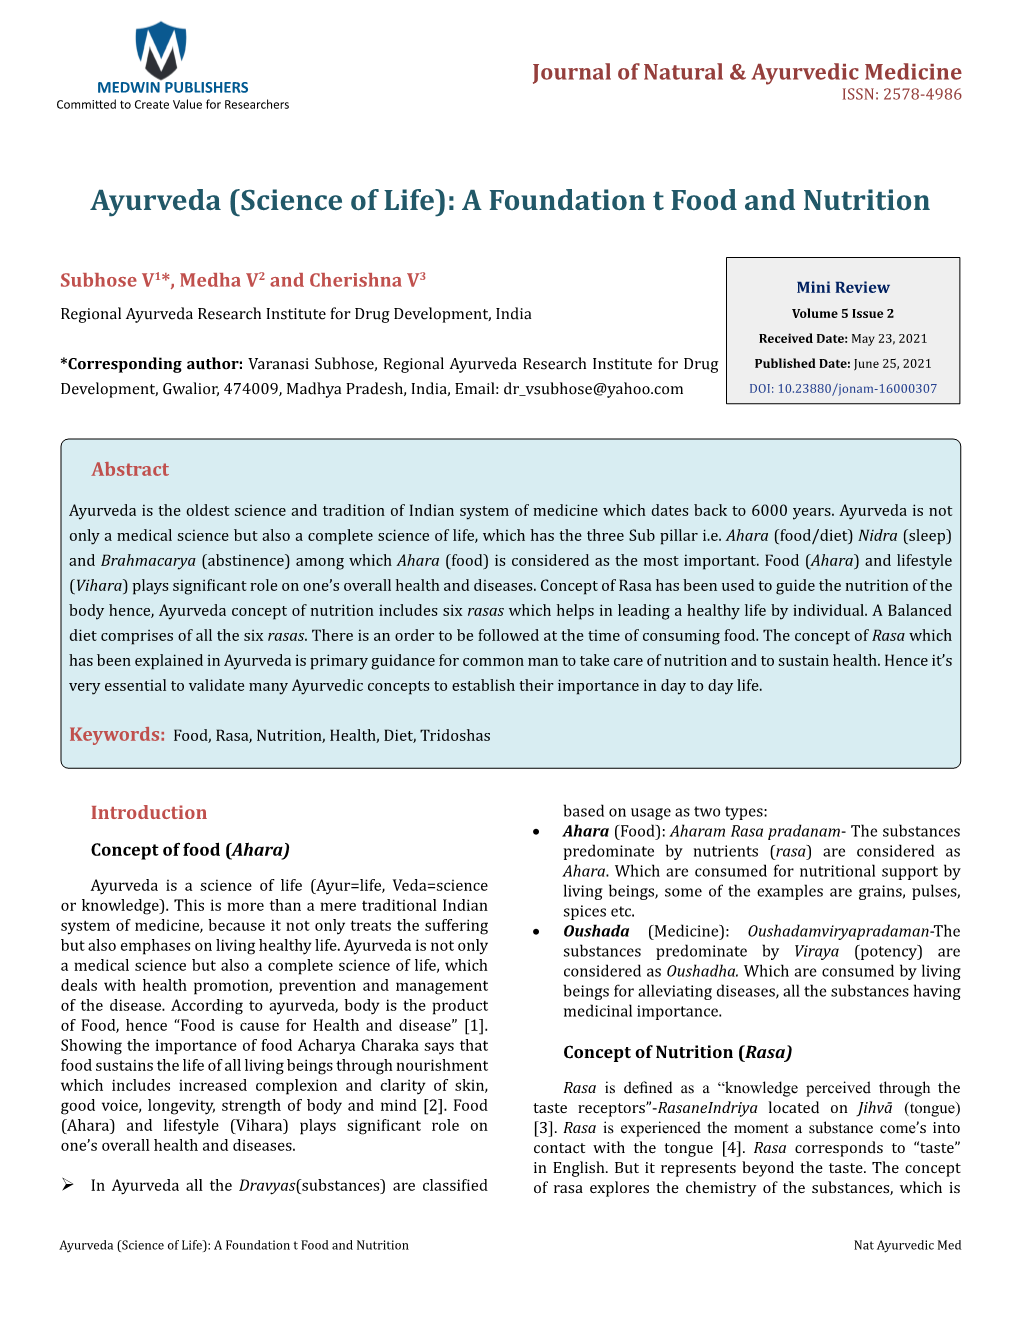 Ayurveda (Science of Life): a Foundation T Food and Nutrition